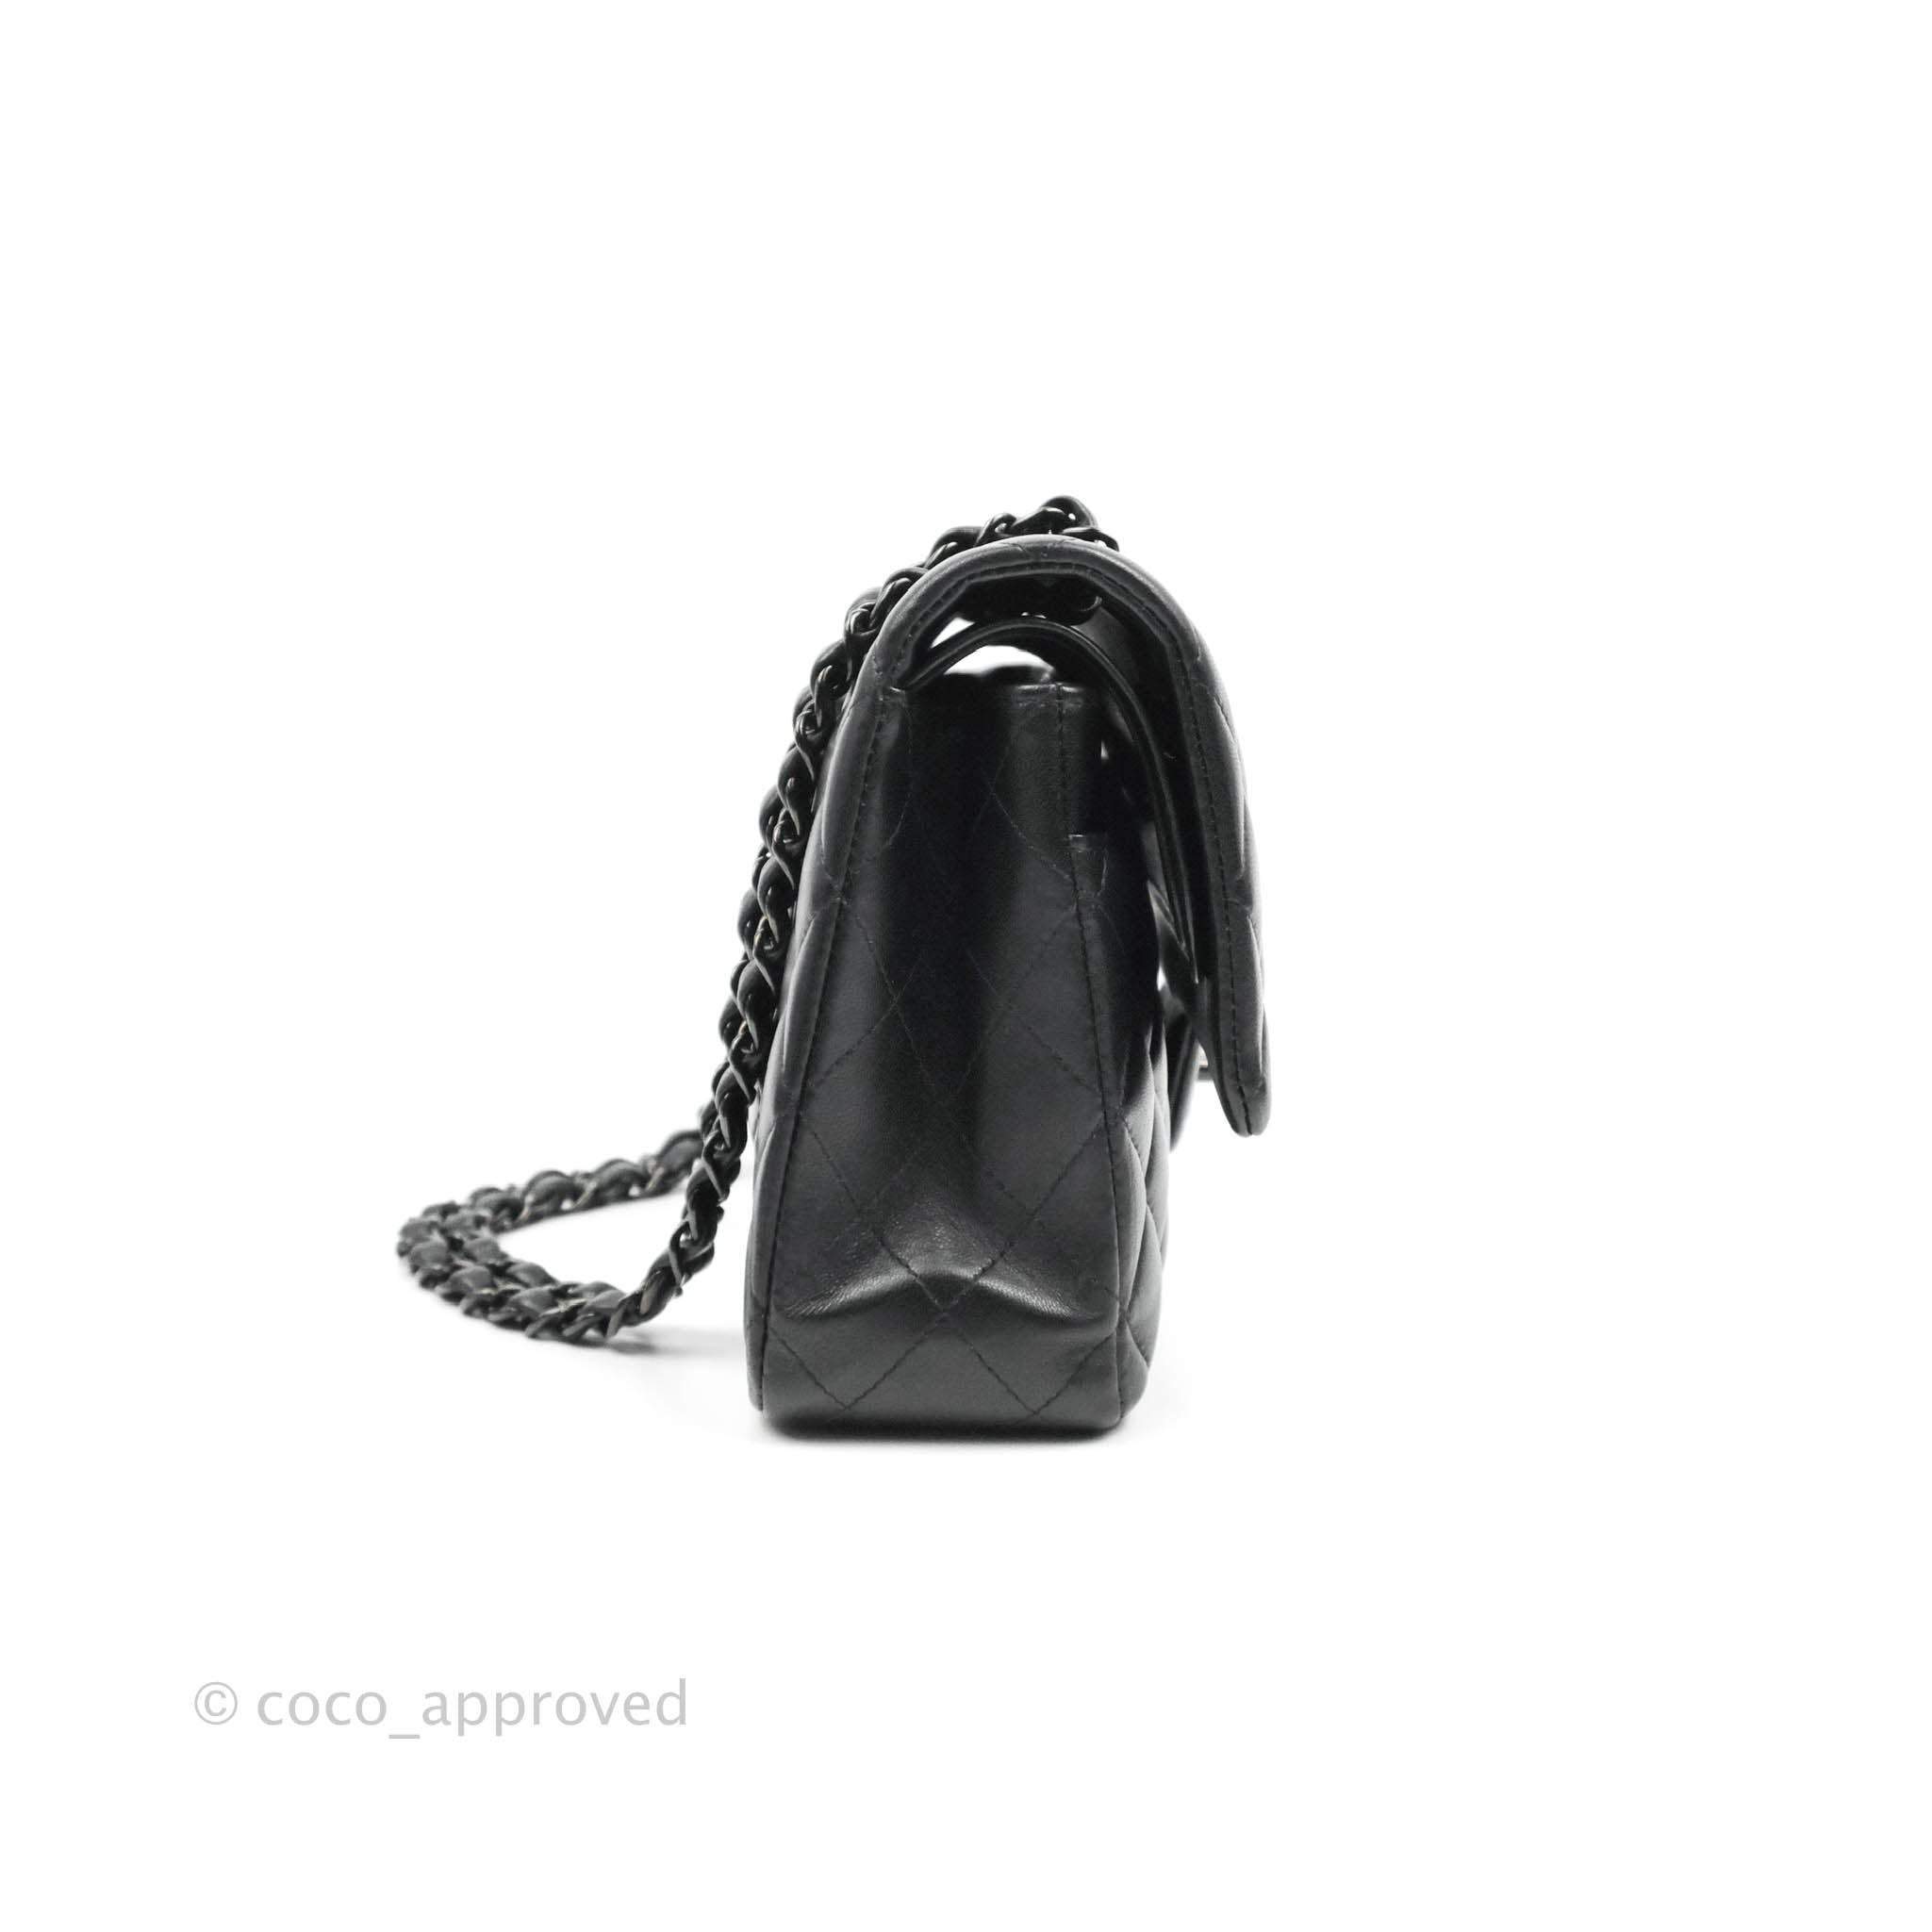 Mademoiselle Chic Single Flap Bag in Black with LGHW